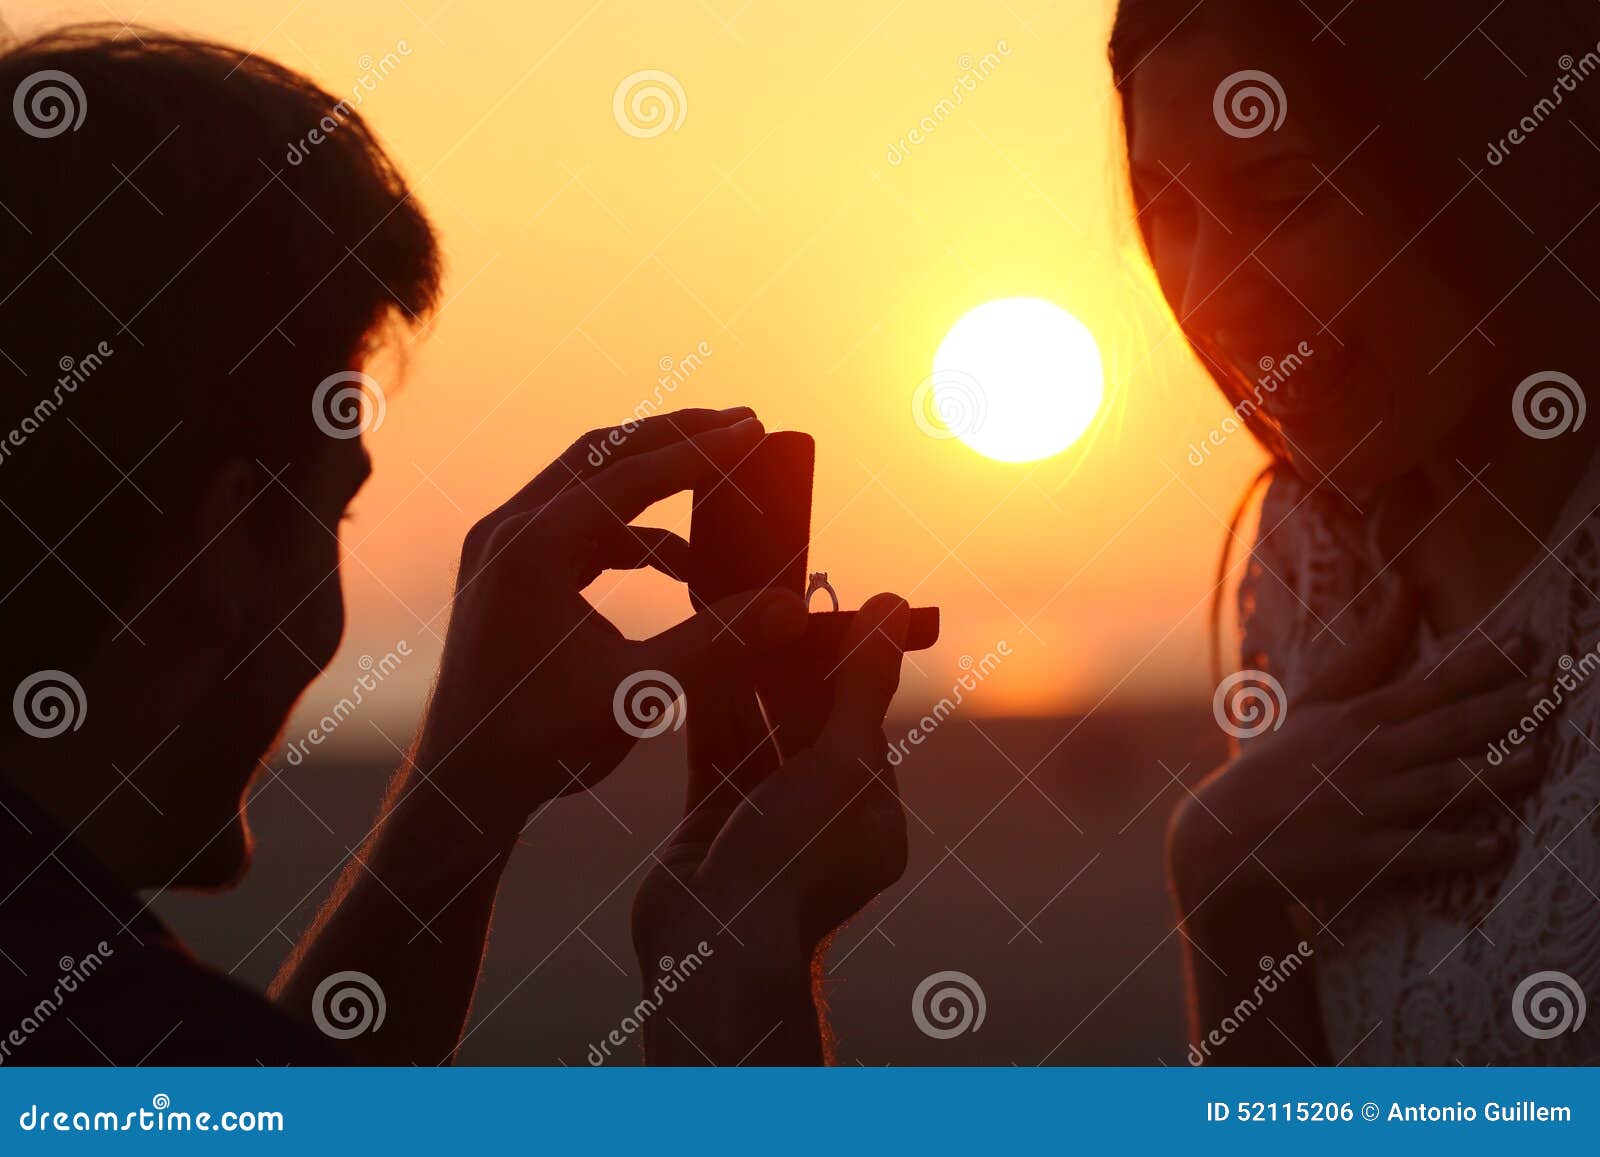 back light of a proposal of marriage at sunset